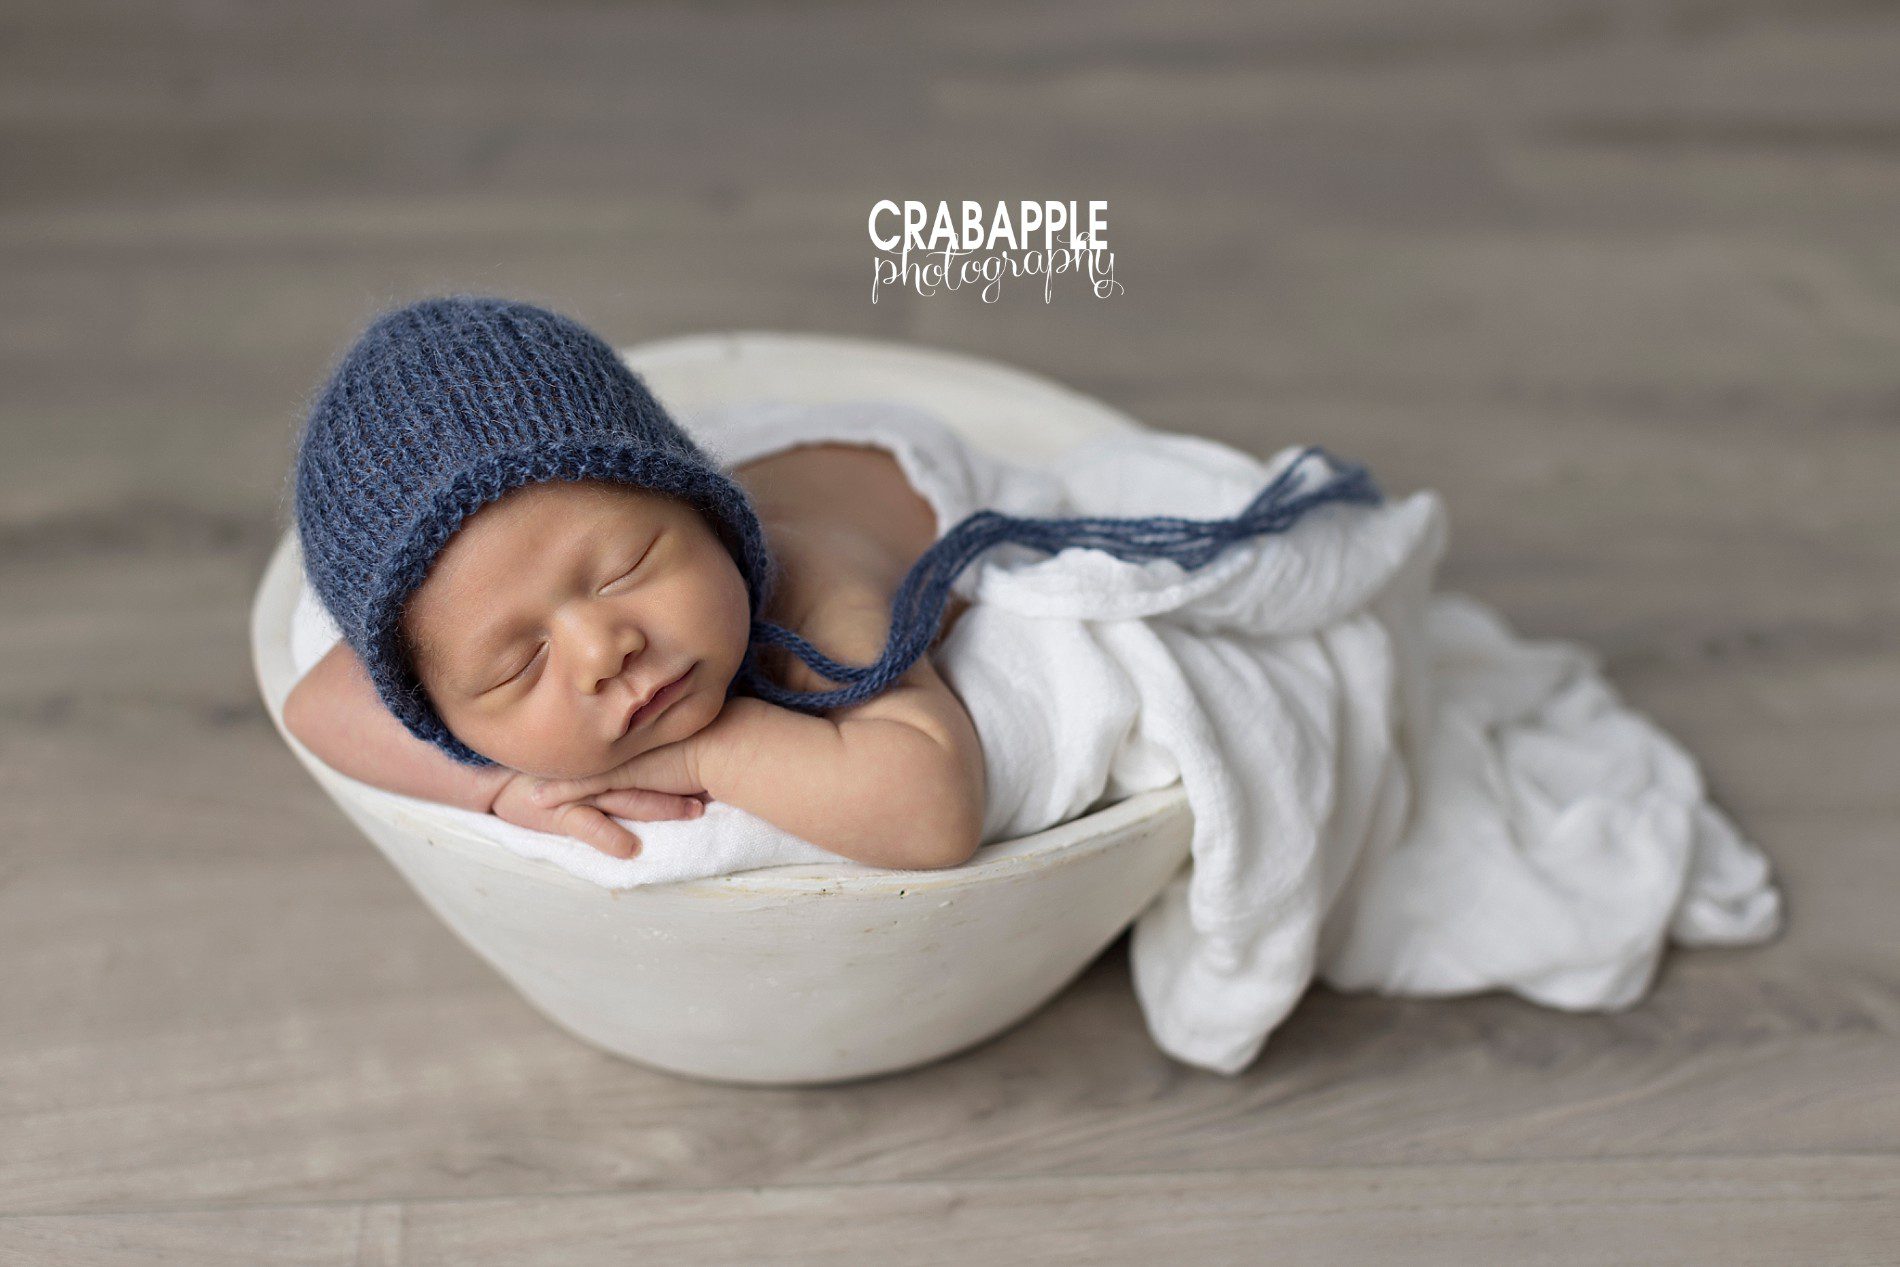 using a wooden bowl for newborn photos